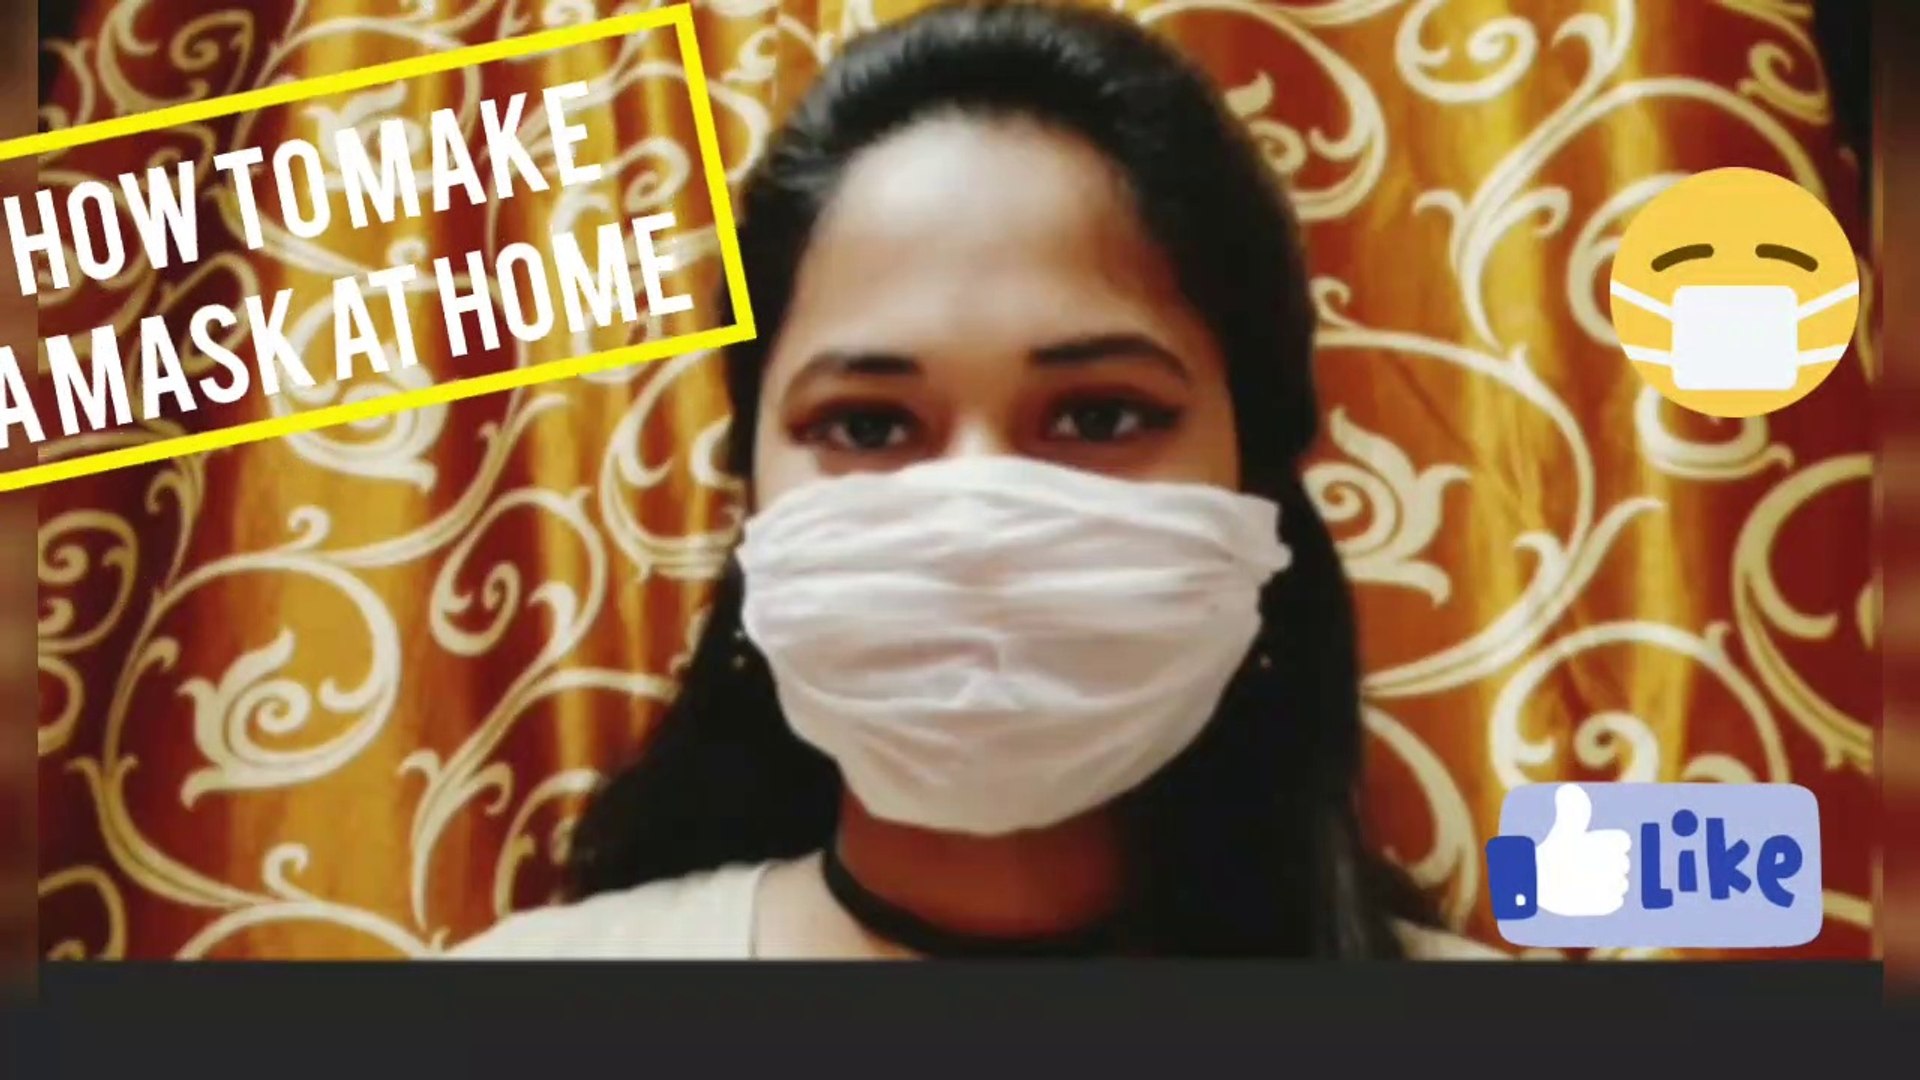 How to Make Mask at Home with Tissue Paper easy step //  #onetimeusemask